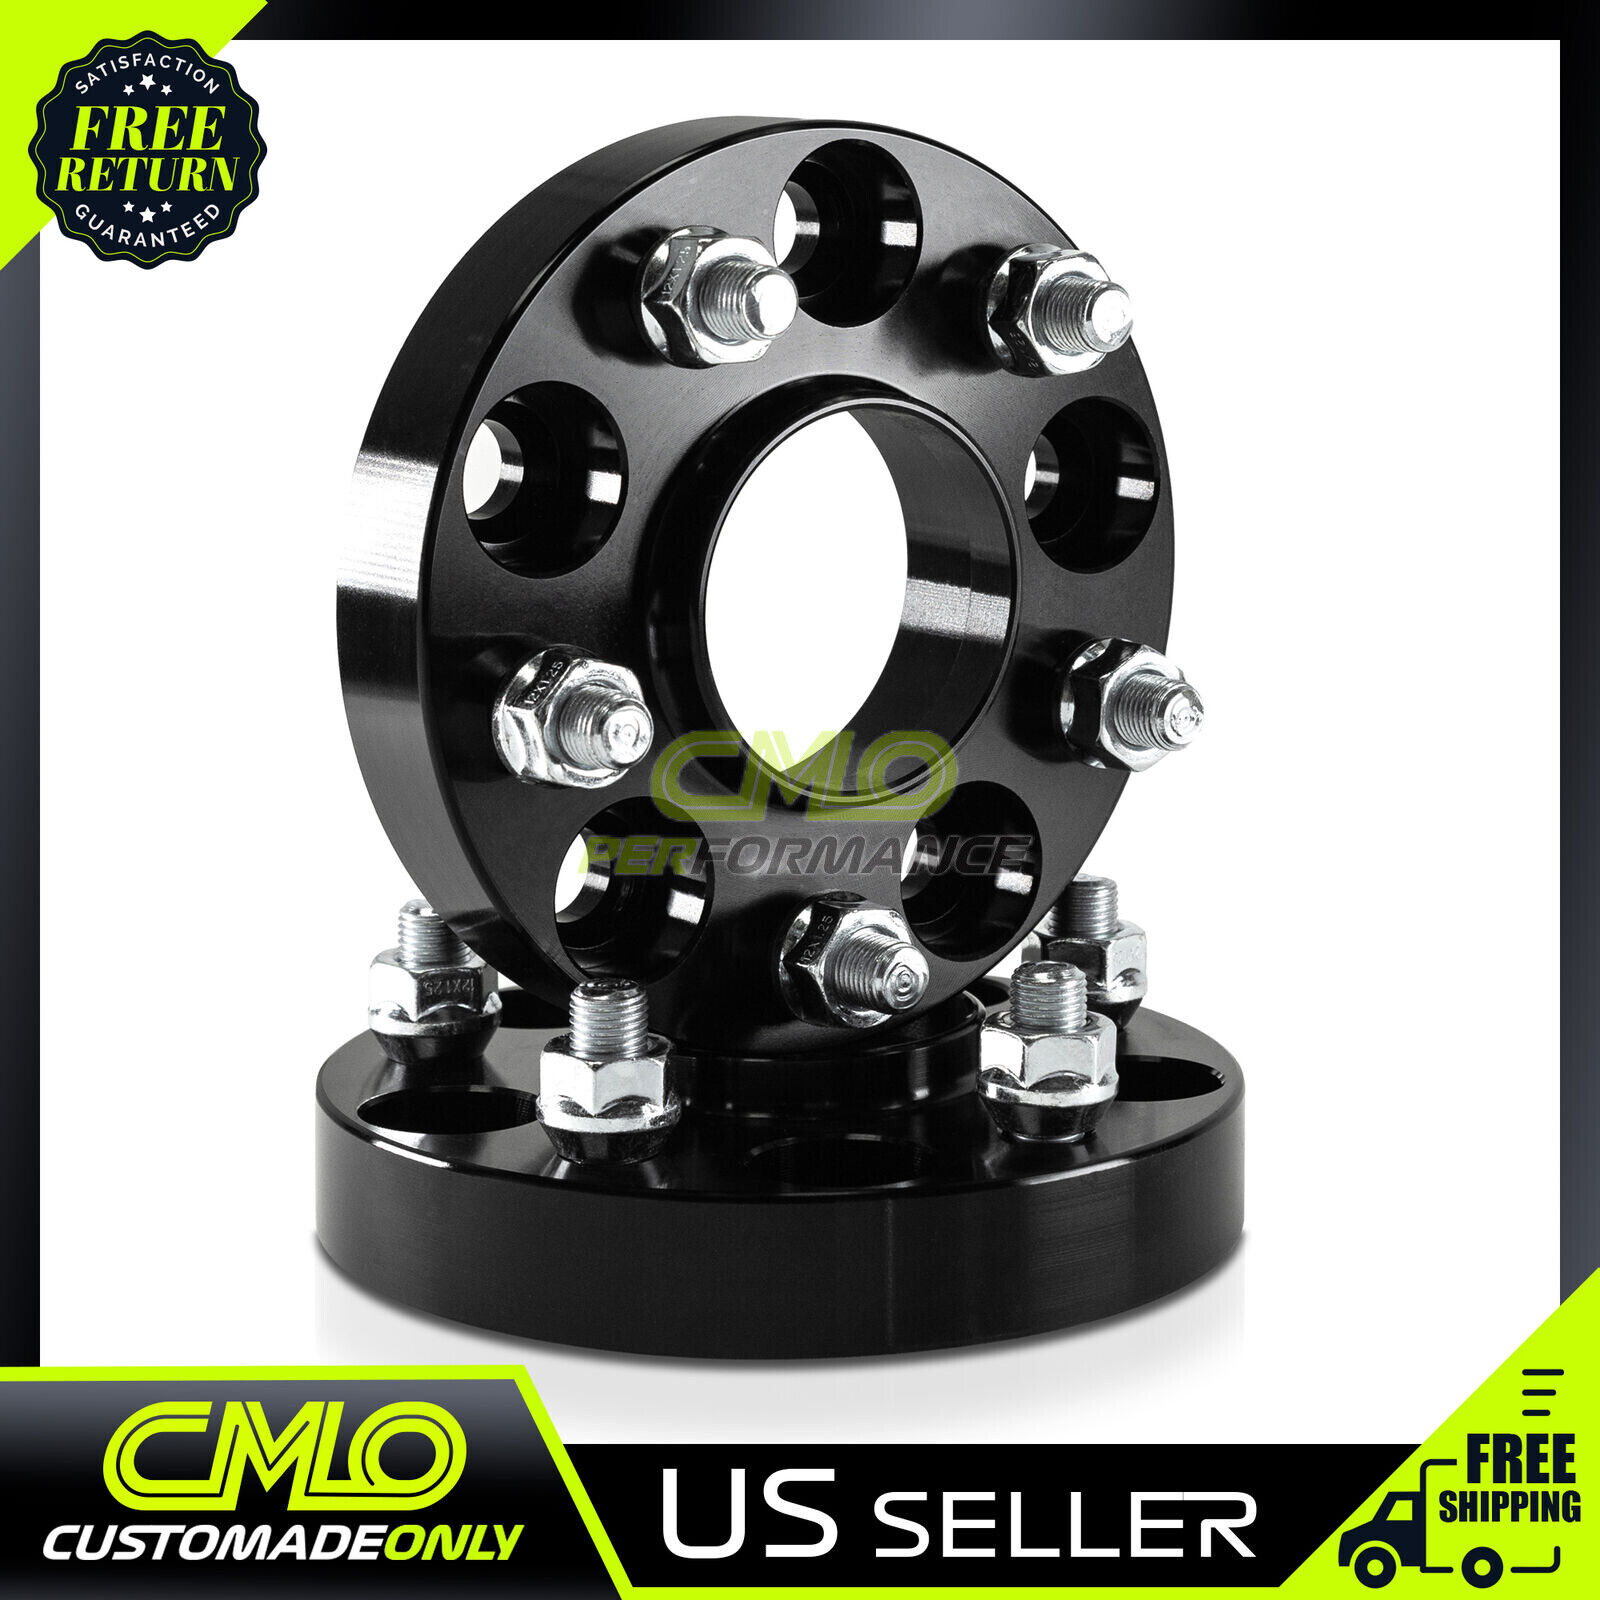 2pc 25mm Black Hubcentric Wheel Spacers 5x114.3 Fits Civic Accord S2000 RSX TSX